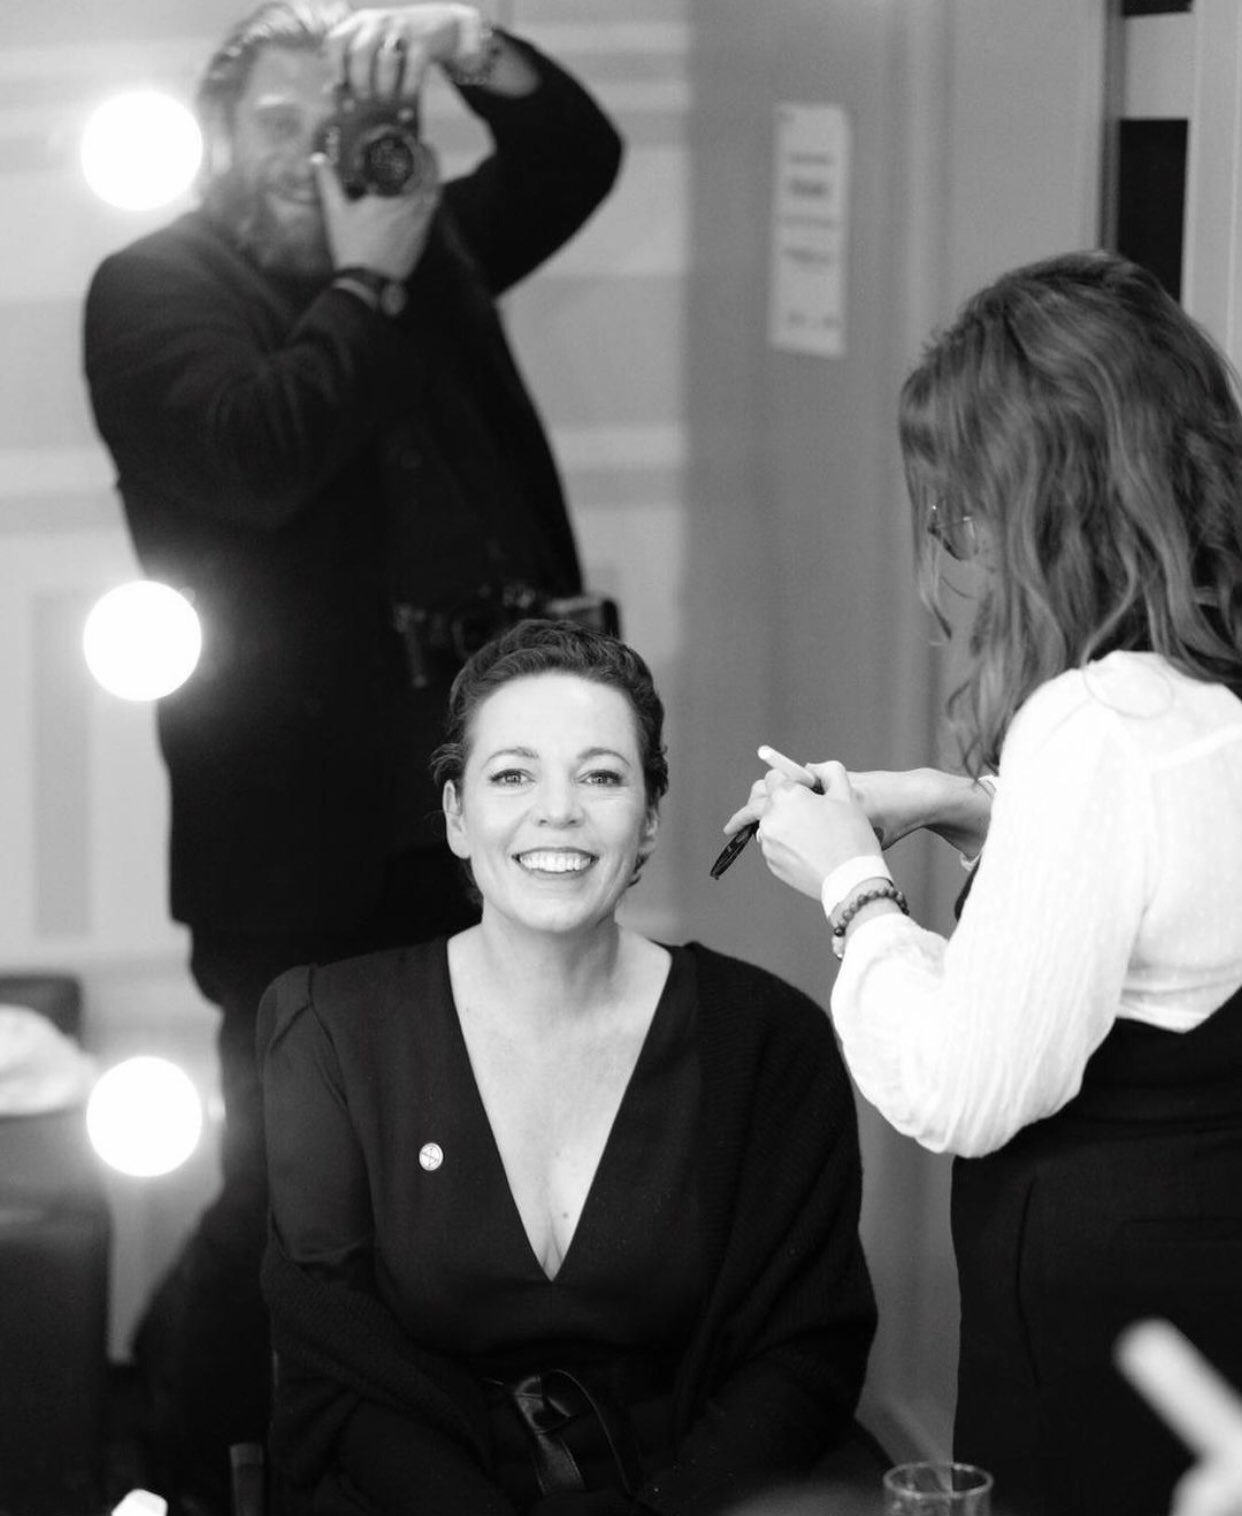 Happy birthday to one of the greatest ever, olivia colman<33 